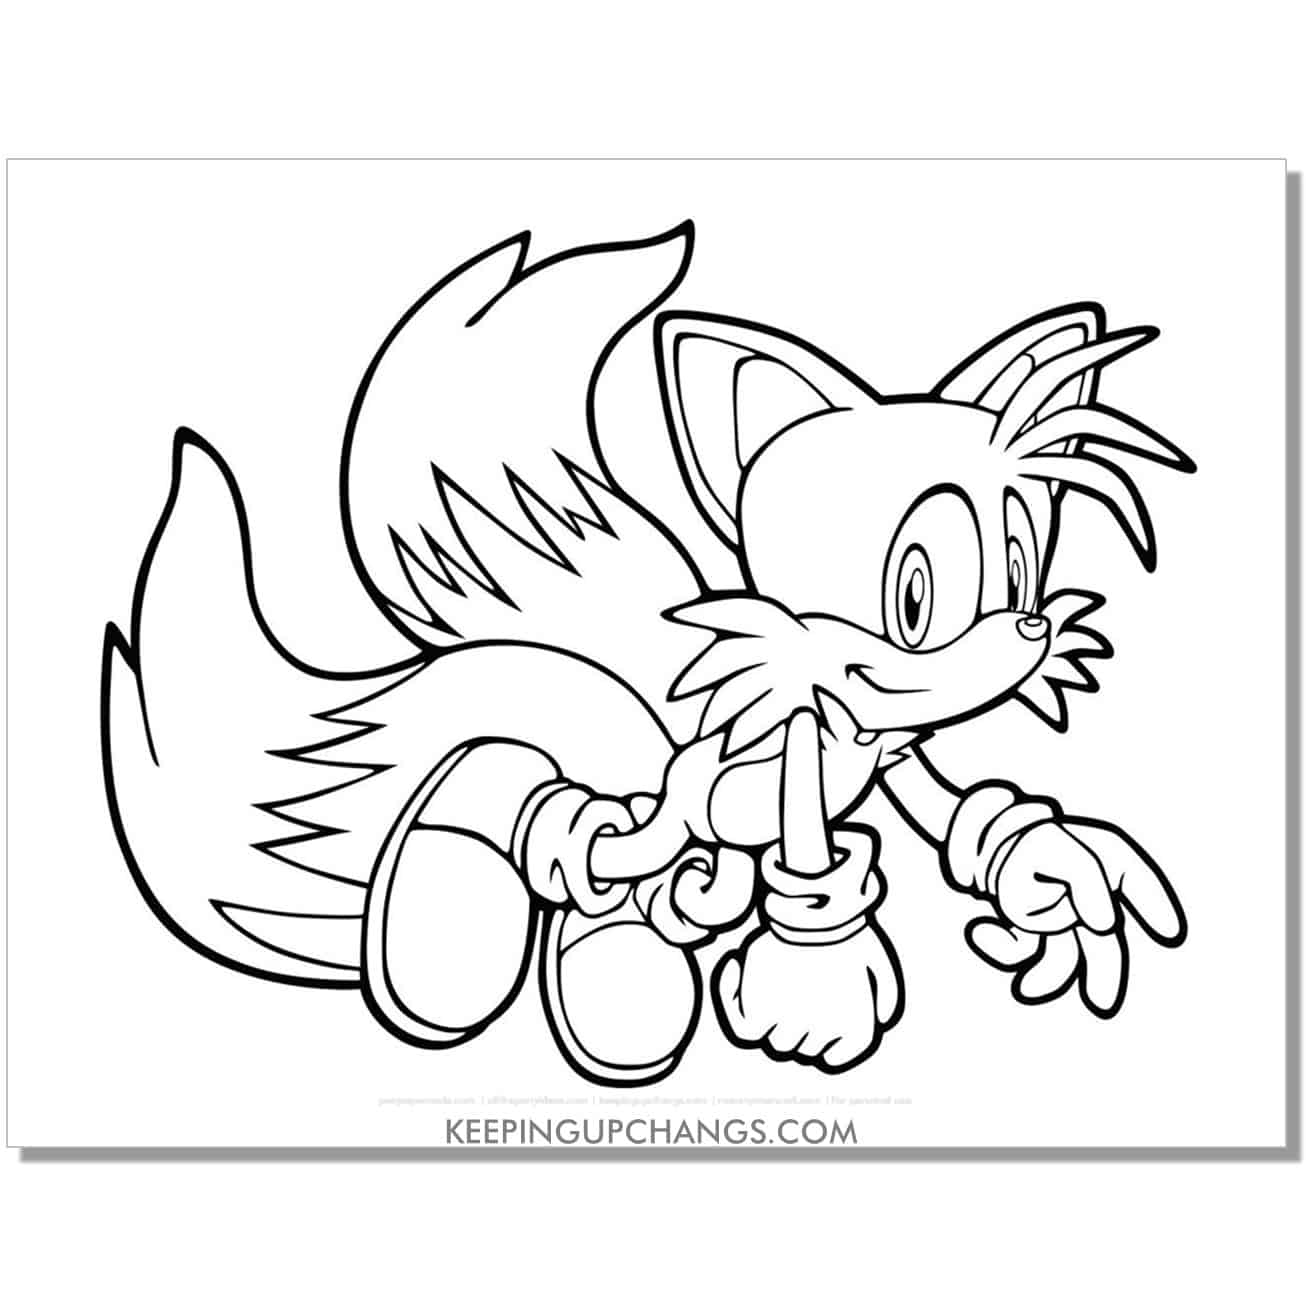 tails flying at rest sonic coloring page.